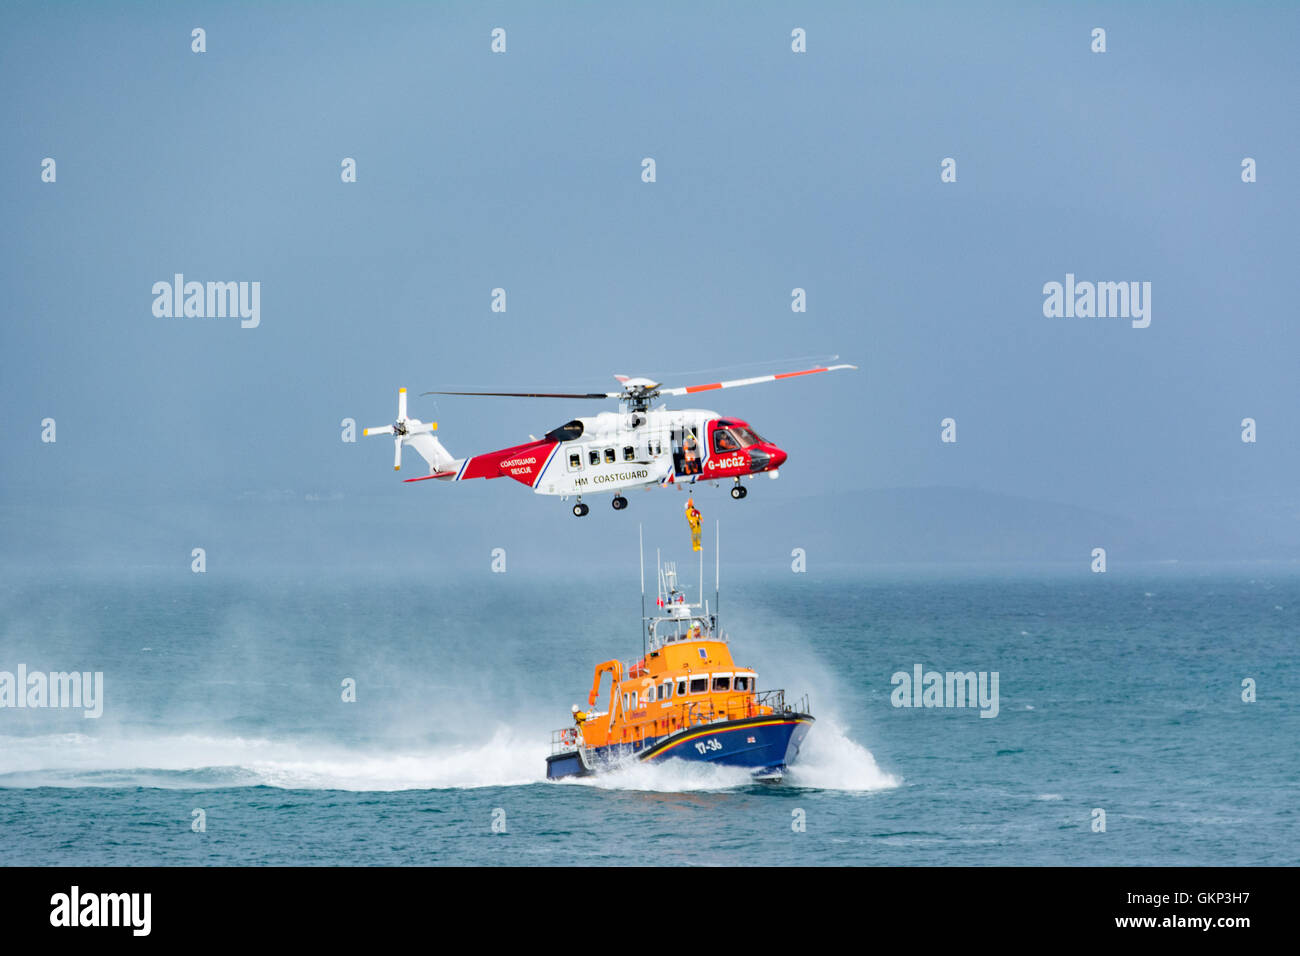 Mousehole, Cornwall, UK. 21st Aug, 2016. After a week of tragedies around the UK coast, and heroic rescues by the RNLI and the Coastguards, the Penlee Lifeboat and Coastguard helicopter display their skills for the annual fundrasing lifeboat day at Mousehole in Cornwall. Credit:  Simon Maycock/Alamy Live News Stock Photo